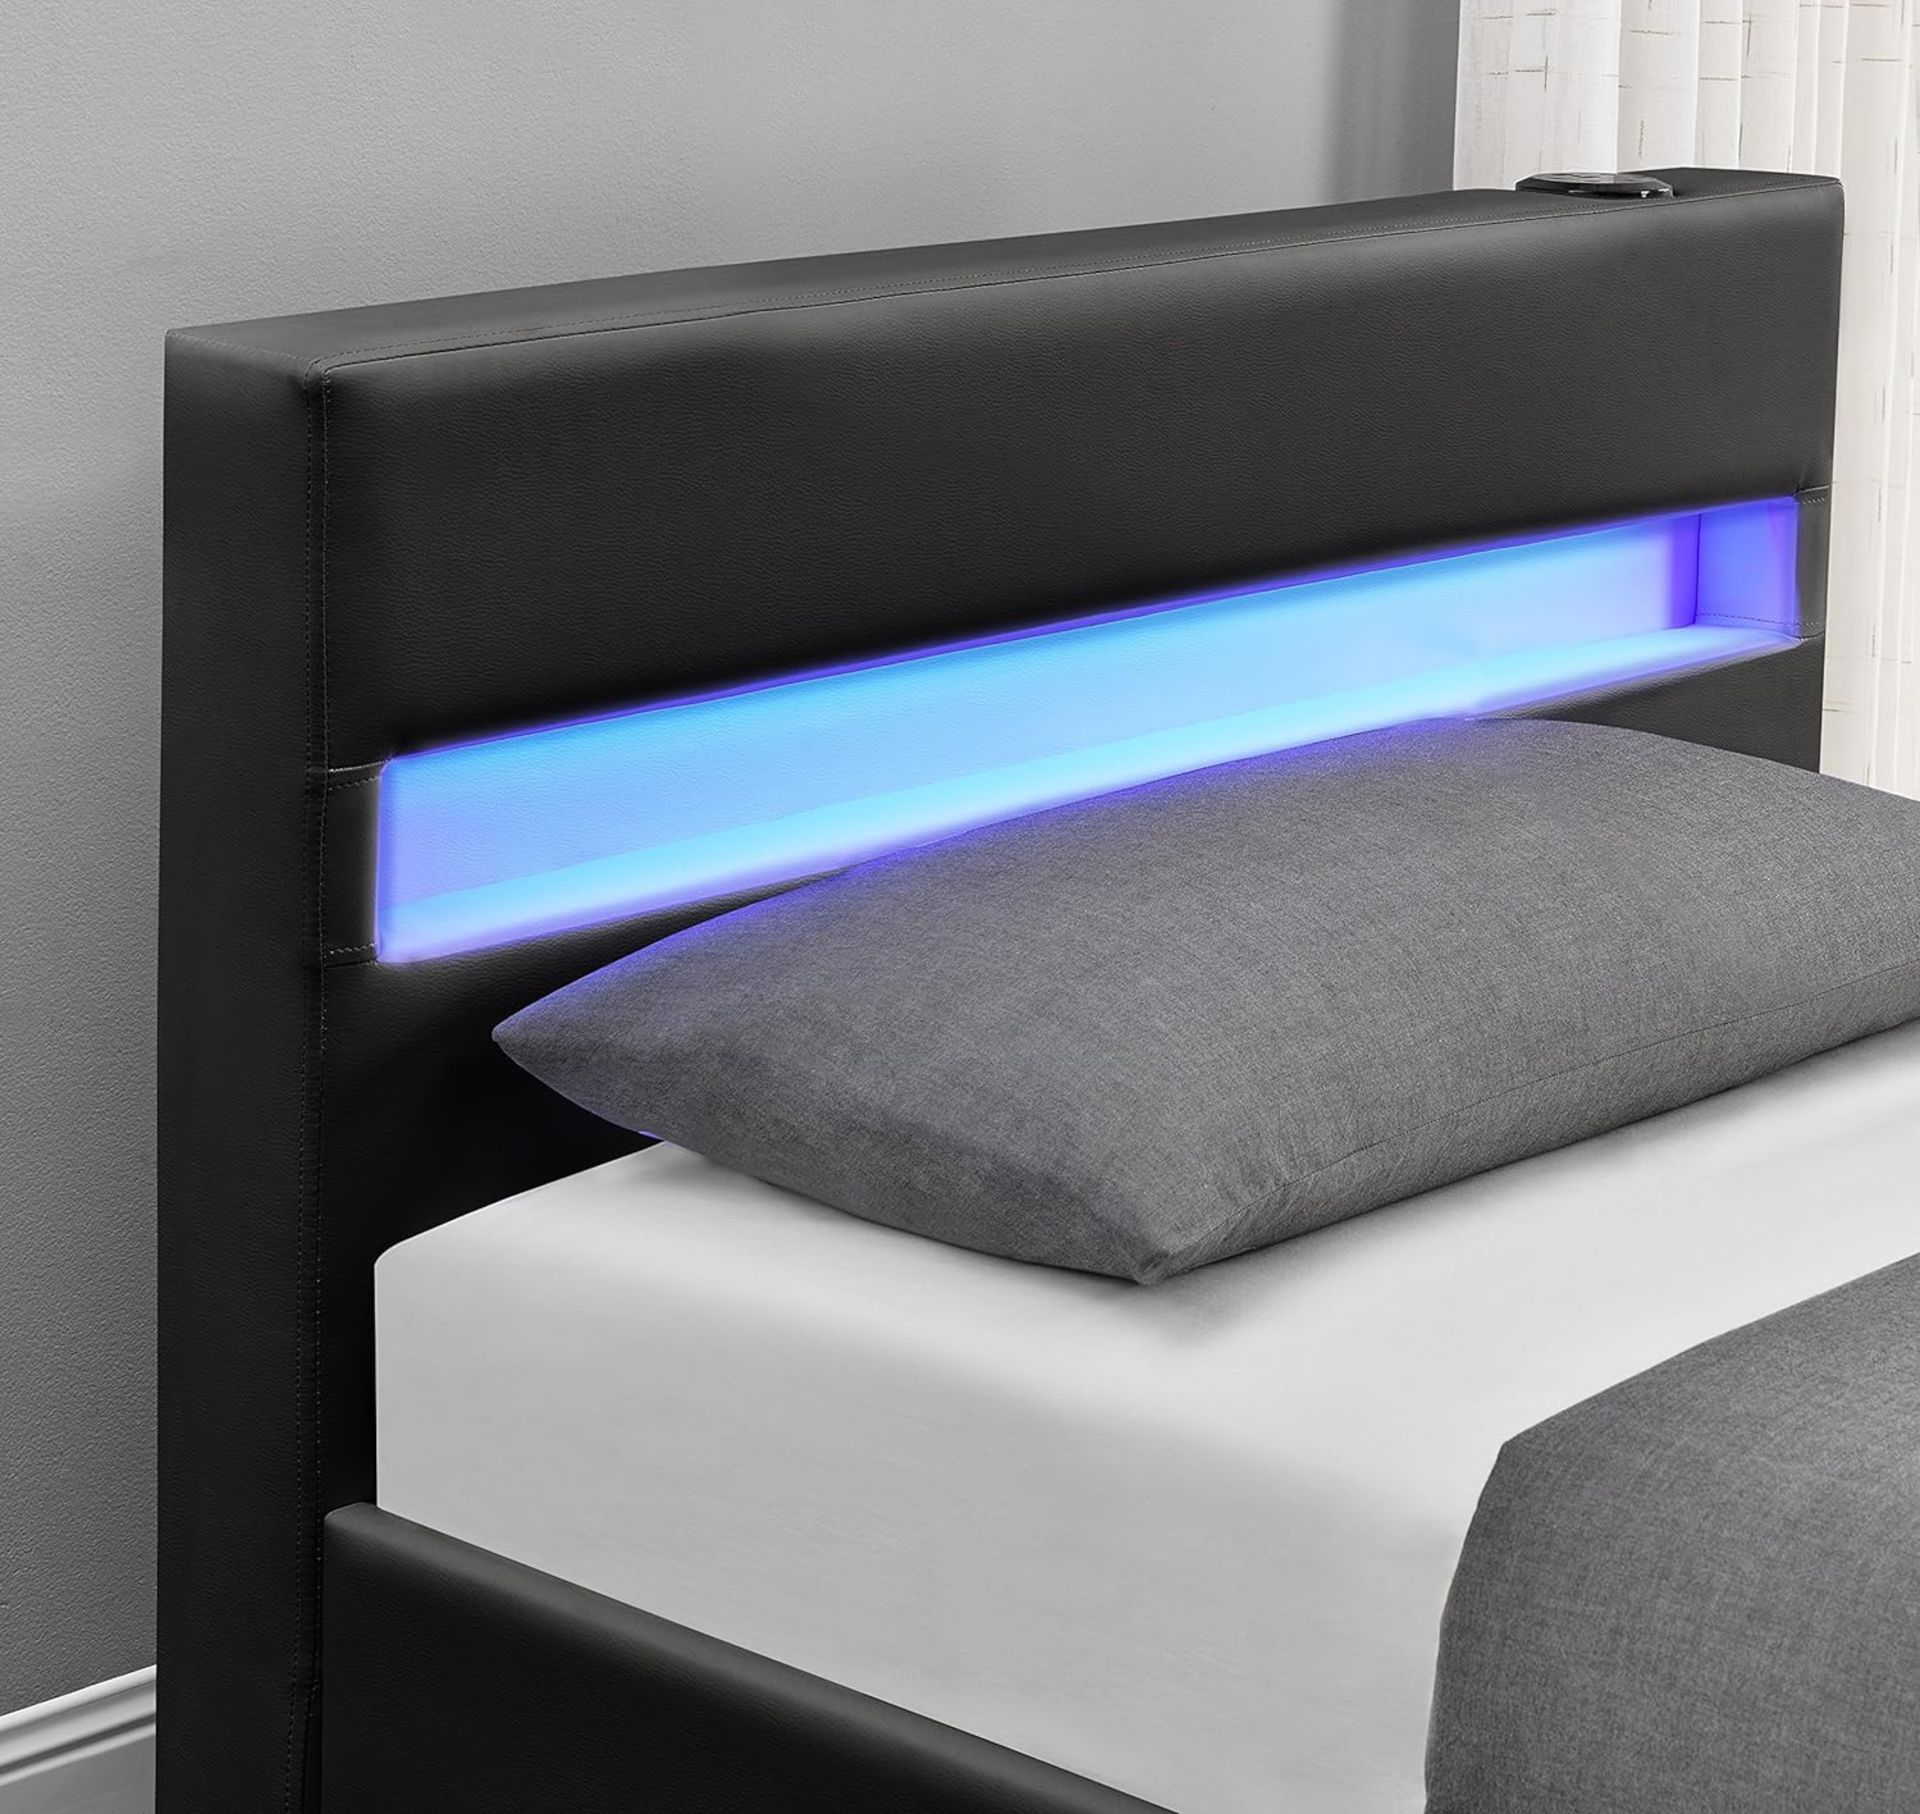 DESIGNER MUSIC BED, BLUETOOTH, SPEAKERS, LED COLOUR CHANGING FAUX LEATHER BED FRAME WITH REMOTE - Image 3 of 4